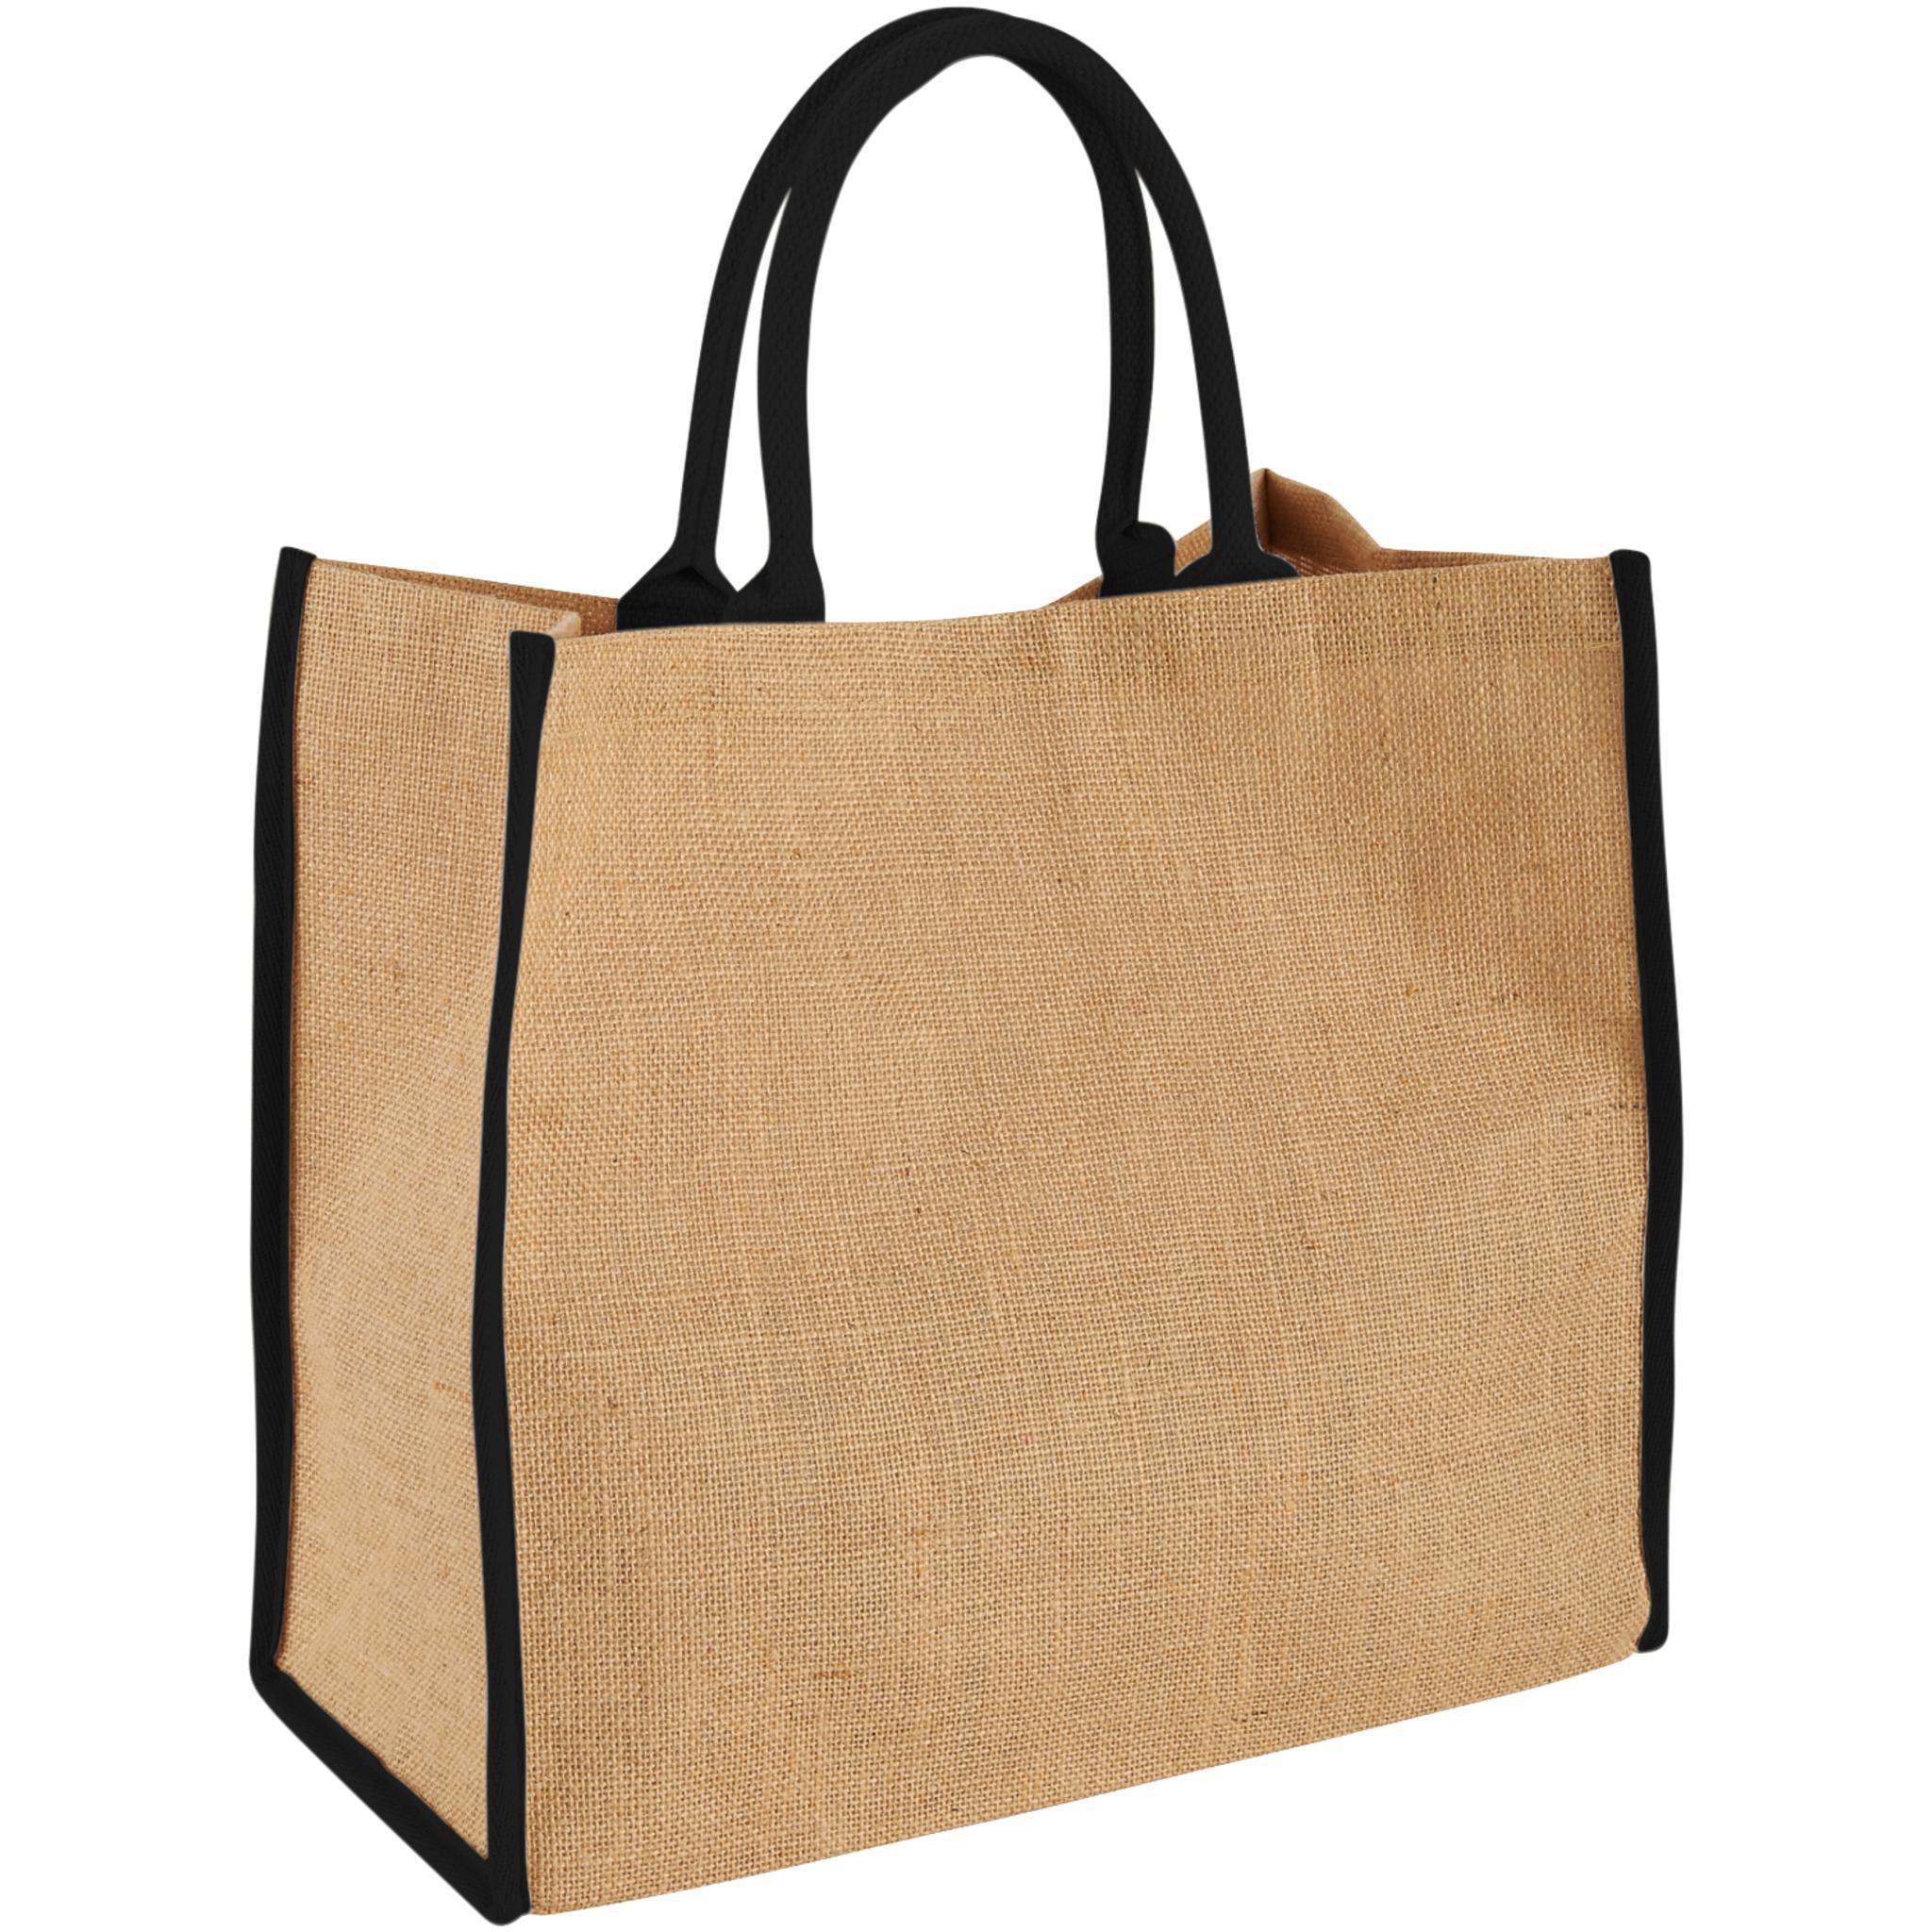 Bullet The Large Jute Tote (Pack of 2) (Natural/Solid Black) (40 x 20 x 35cm)